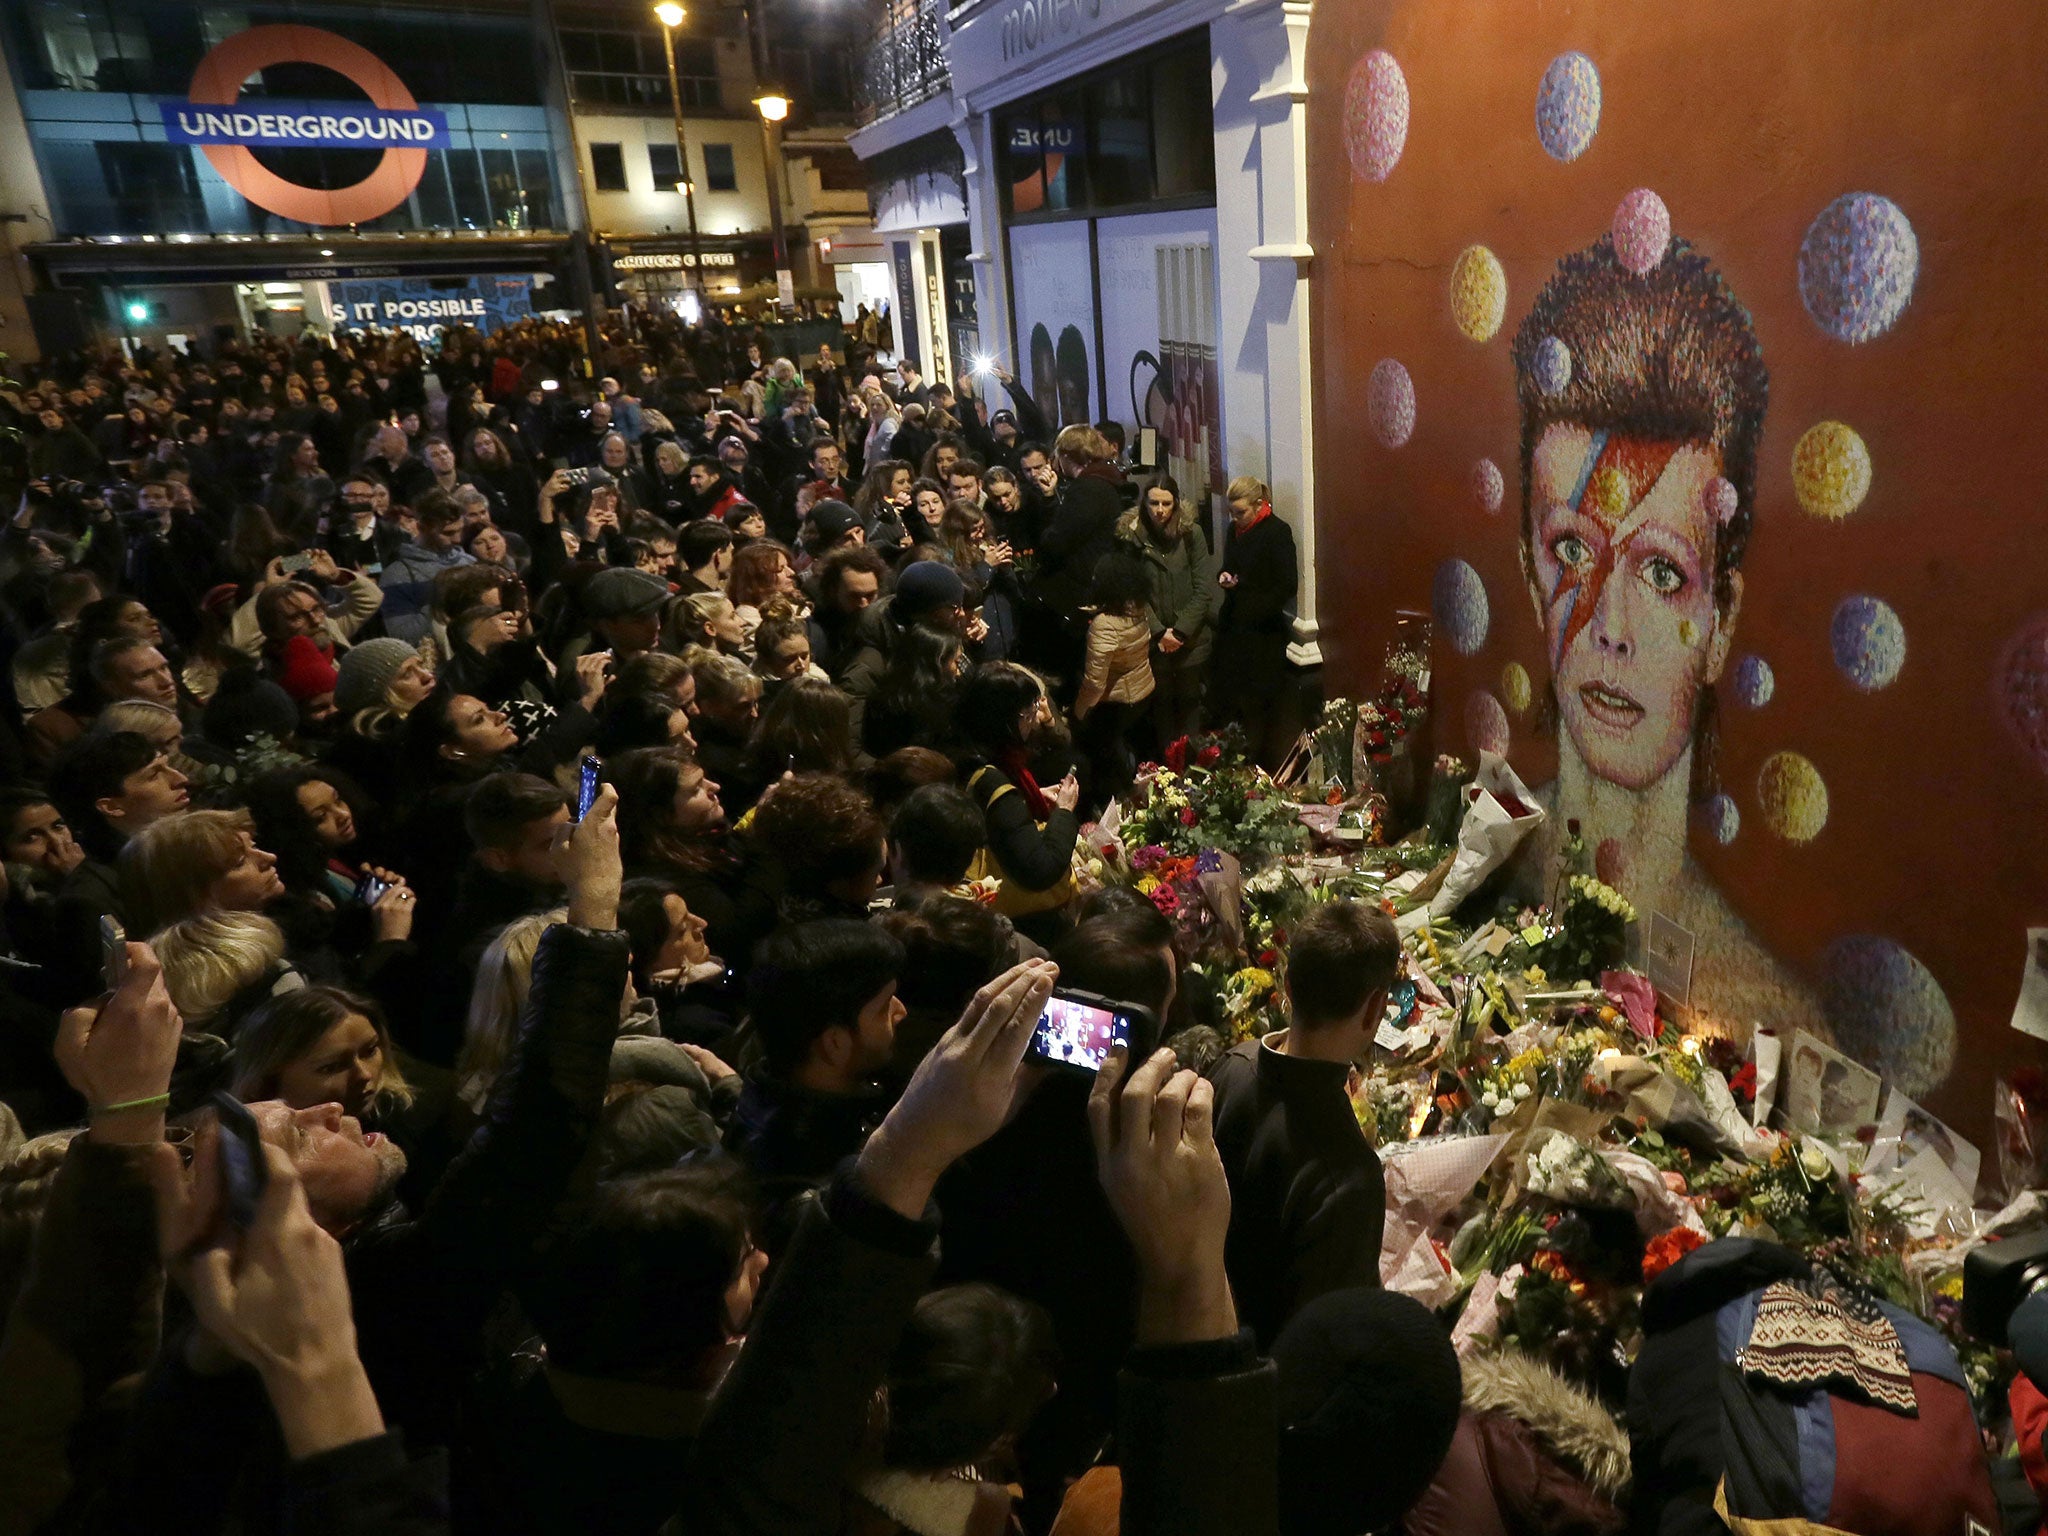 David Bowie fans gather in Brixton to pay tribute to the artist